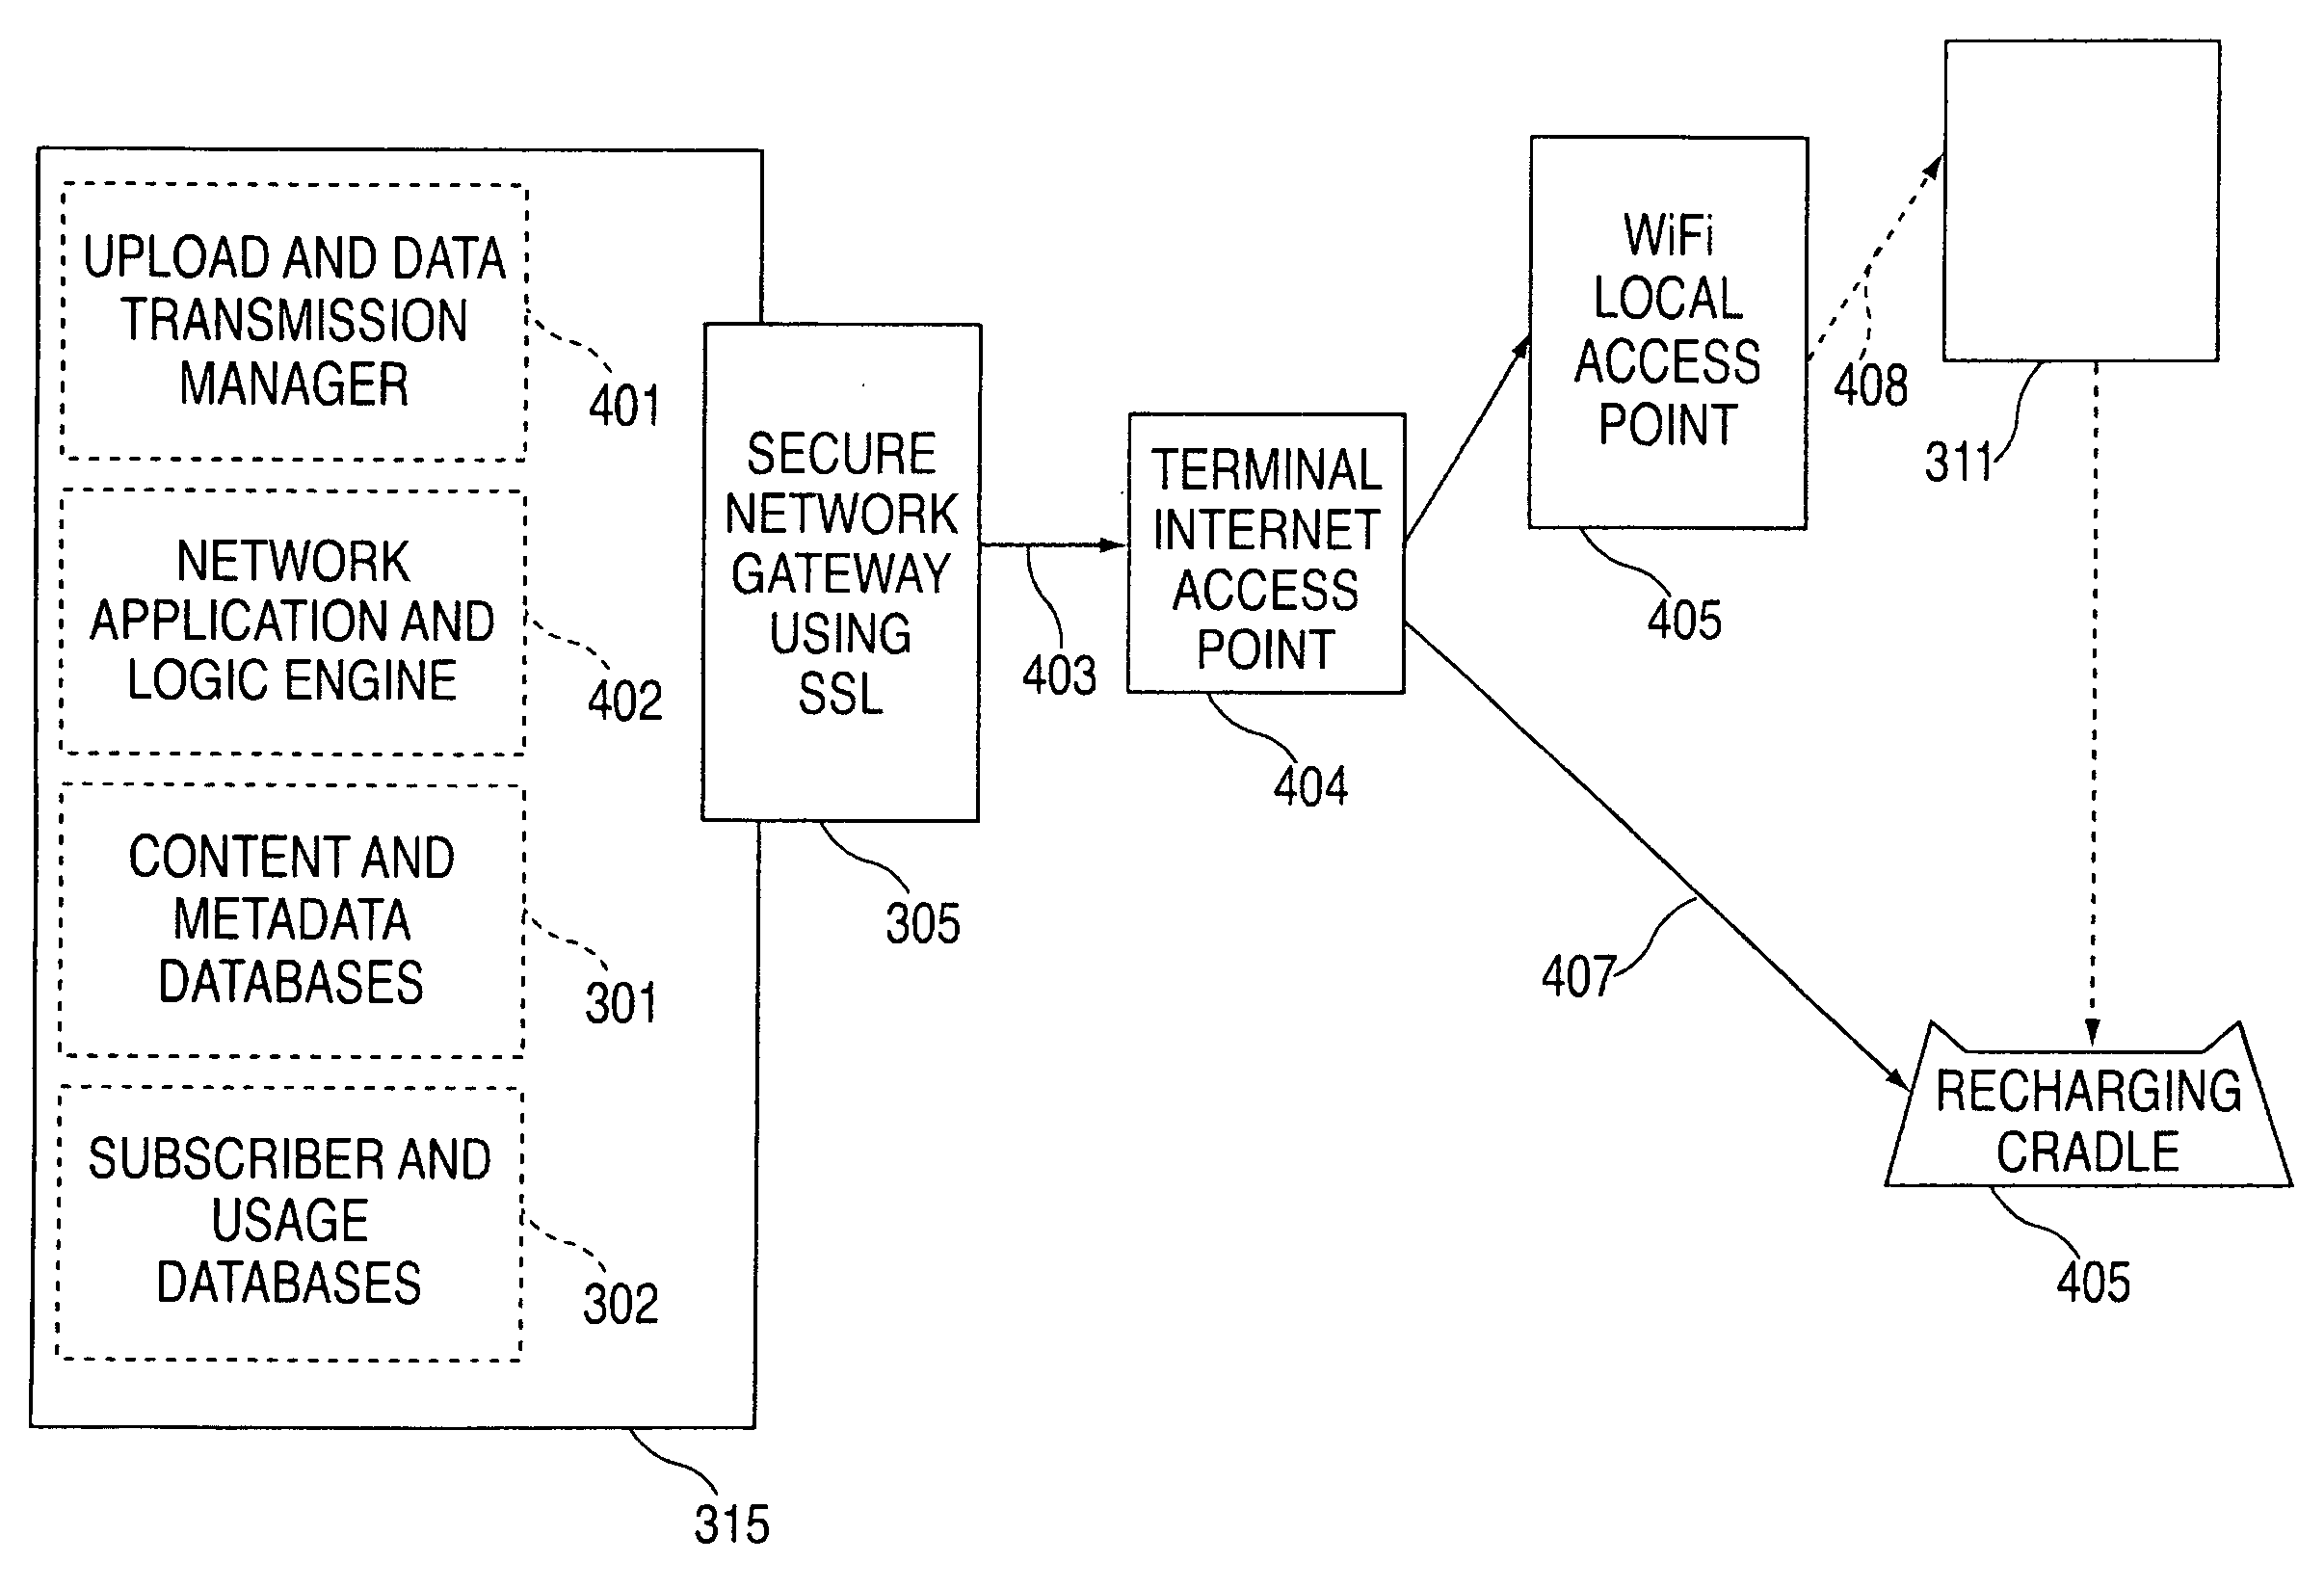 System sharing user content on a content-receiving device